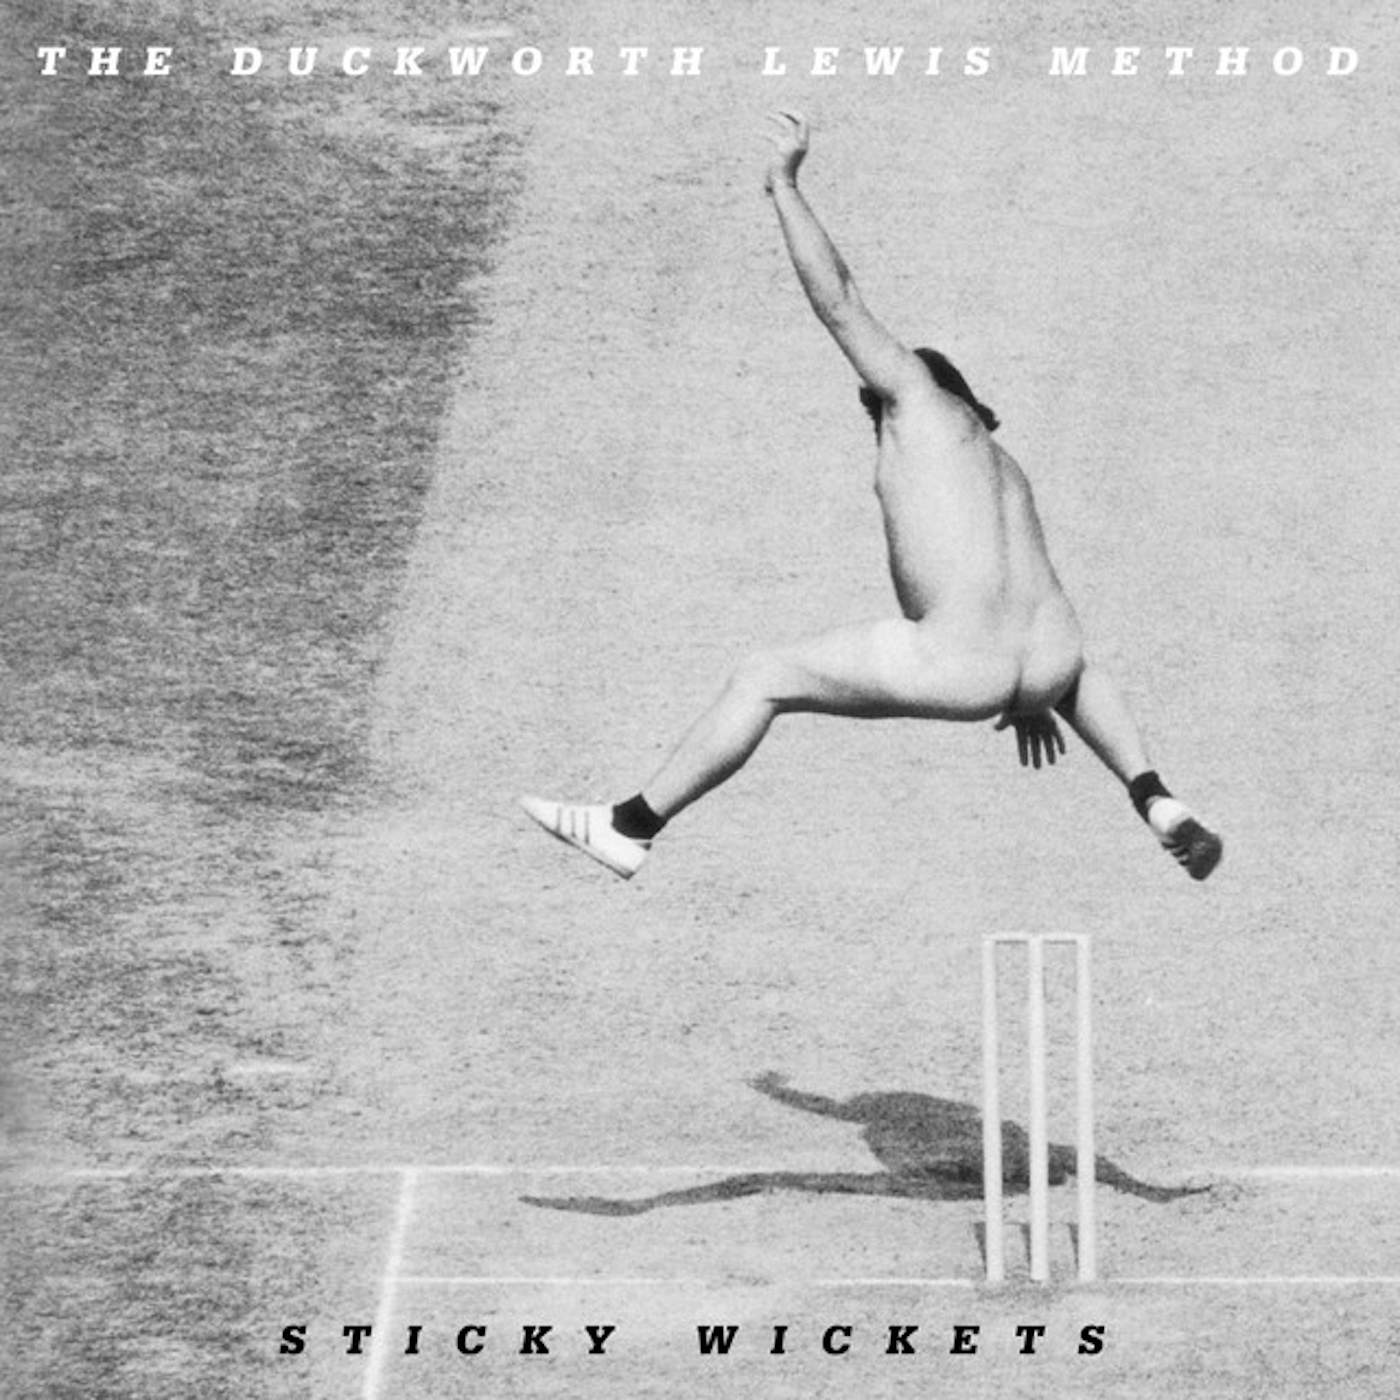 The Duckworth Lewis Method STICKY WICKETS Vinyl Record - UK Release